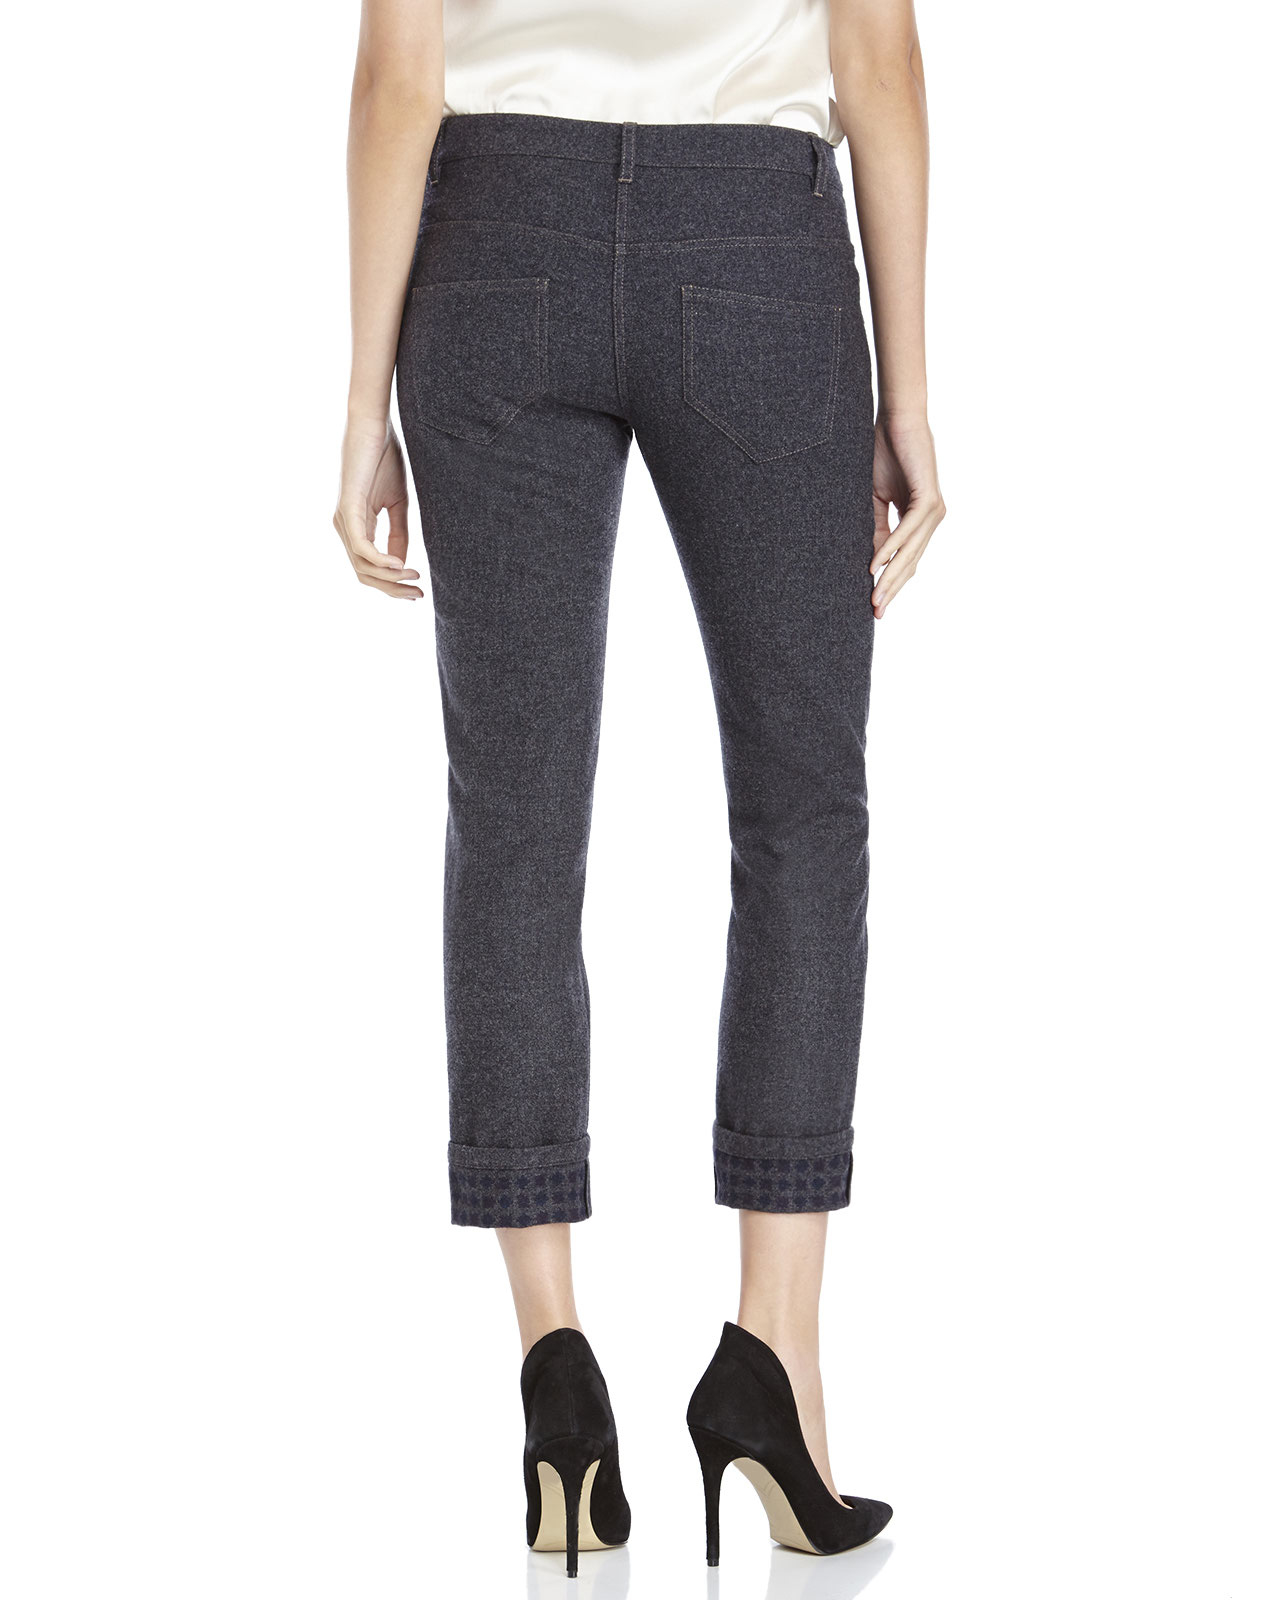 Lyst - Brunello Cucinelli Cropped Wool Pants in Gray